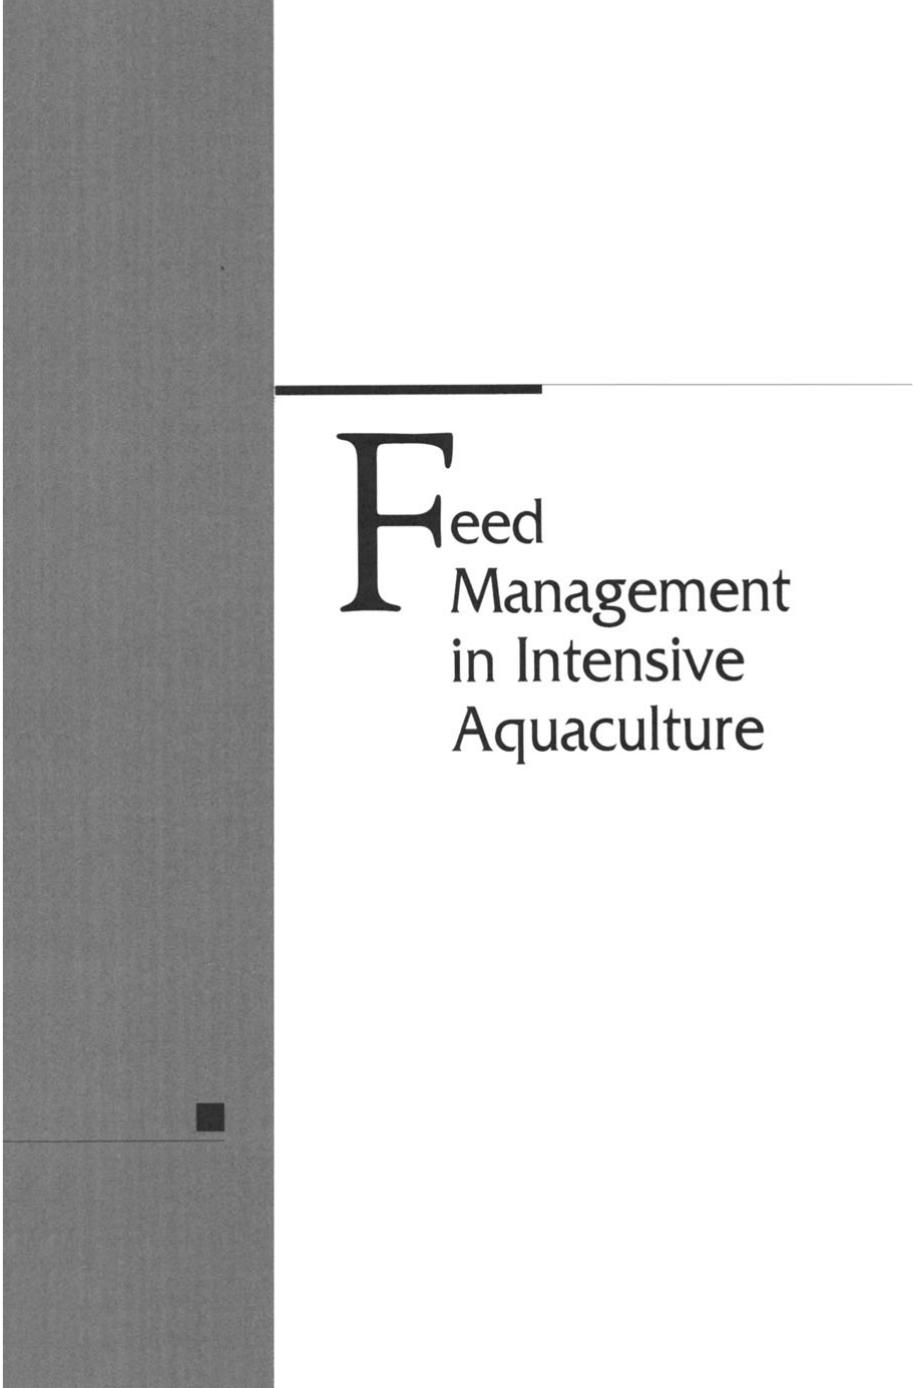 Feed Management in Intensive Aquaculture-Springer US (1996)